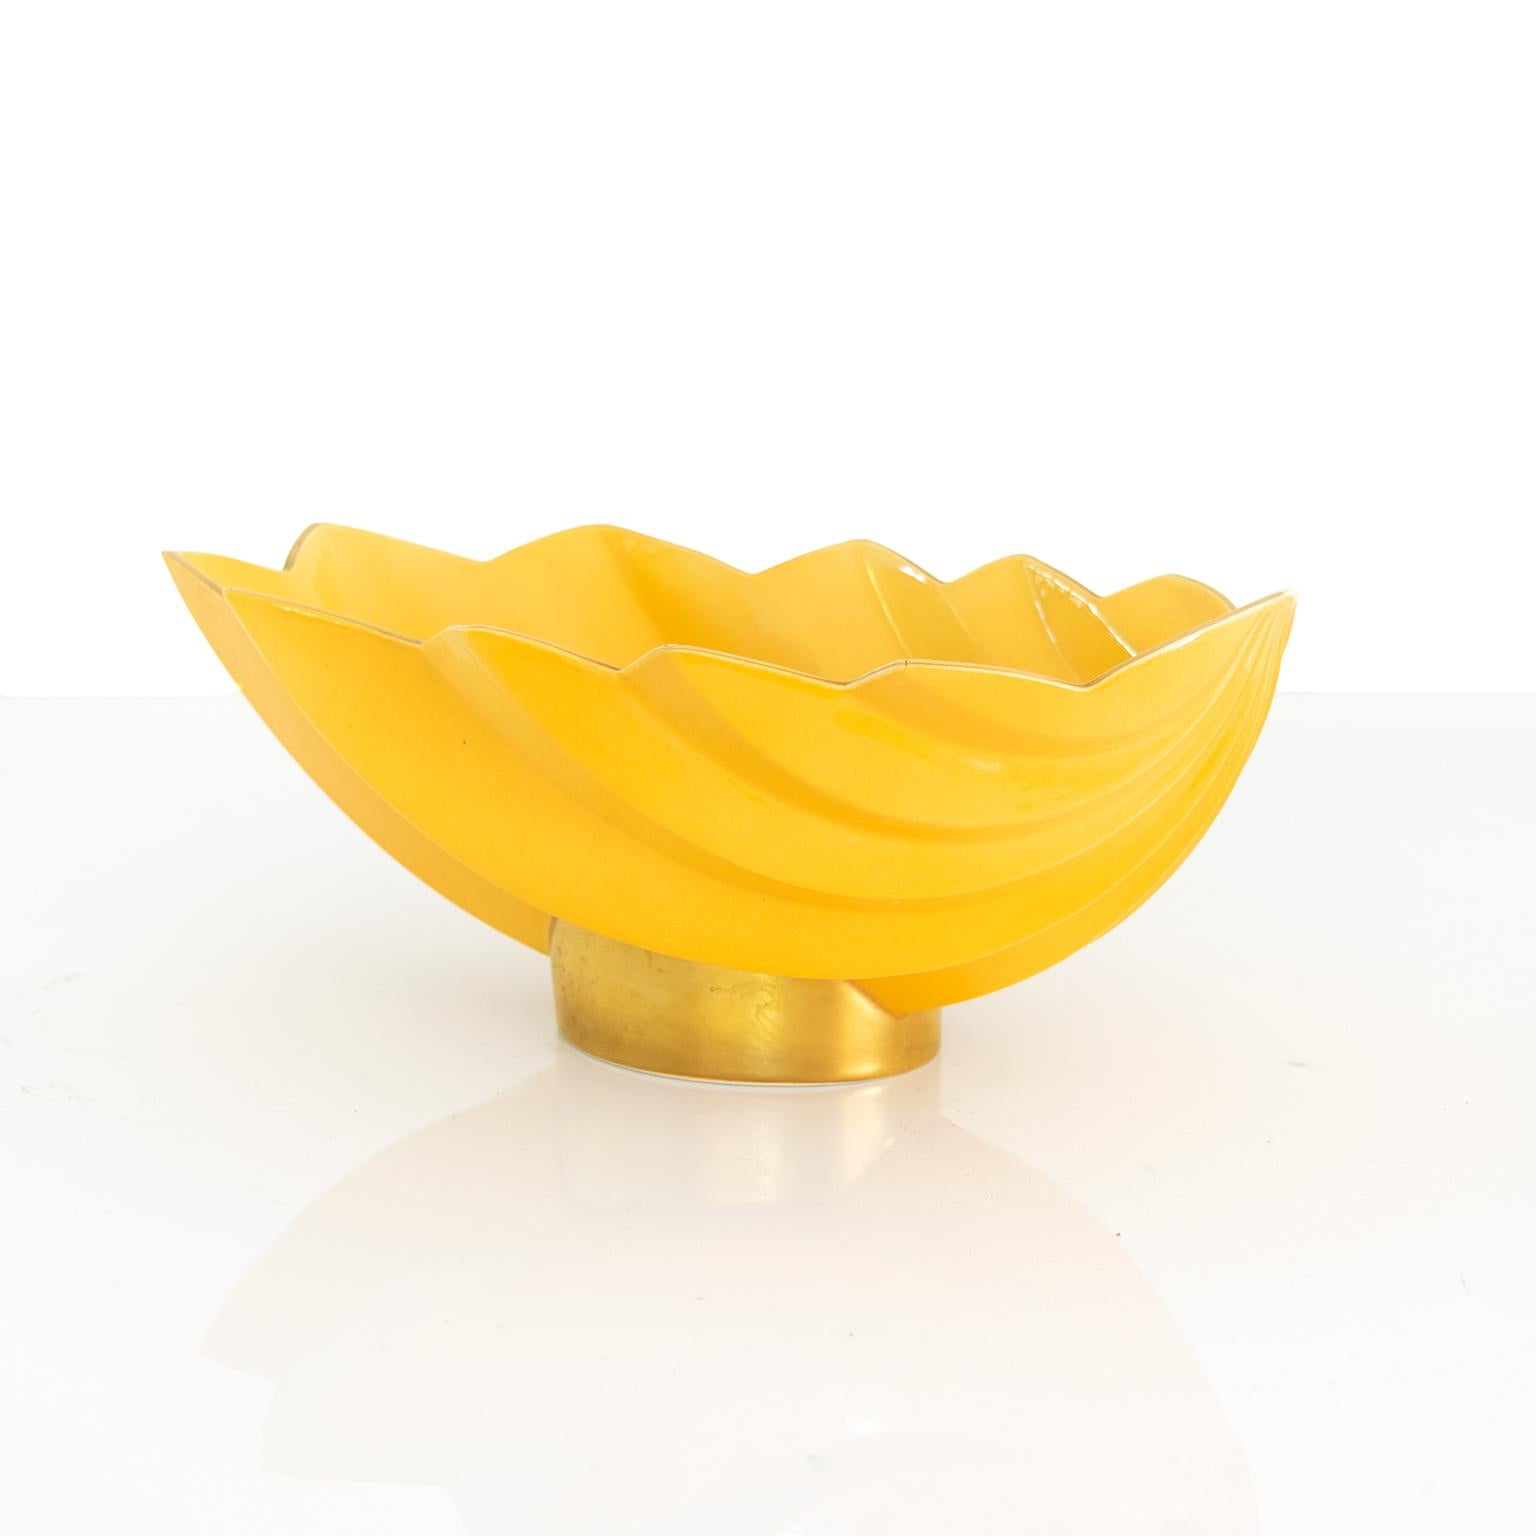 A large elegant Scandinavian Modern yellow colored glaze ceramic footed bowl with gold details. Designed by Karin Bjornquist for Rörstrand, Sweden, signed and dated 1996 on the bottom.

Measures: Height 8” width 7” depth 12.5”.